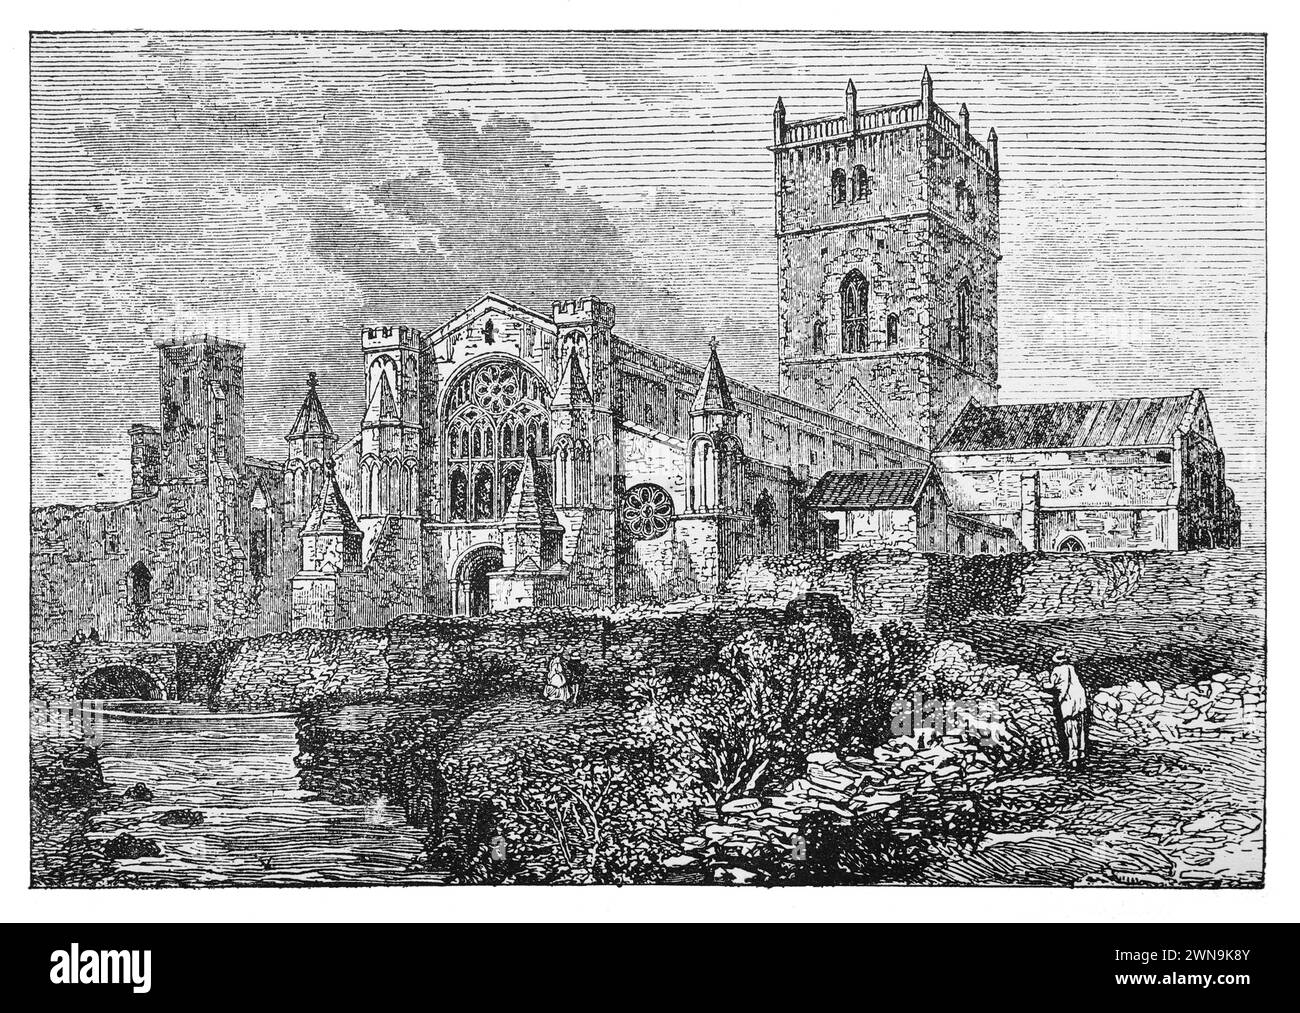 St David's Cathedral, Wales in the 19th Century: Engraving from Lives of the Saints by the Reverend Sabin Baring-Gould, pubblicato nel 1898 Foto Stock